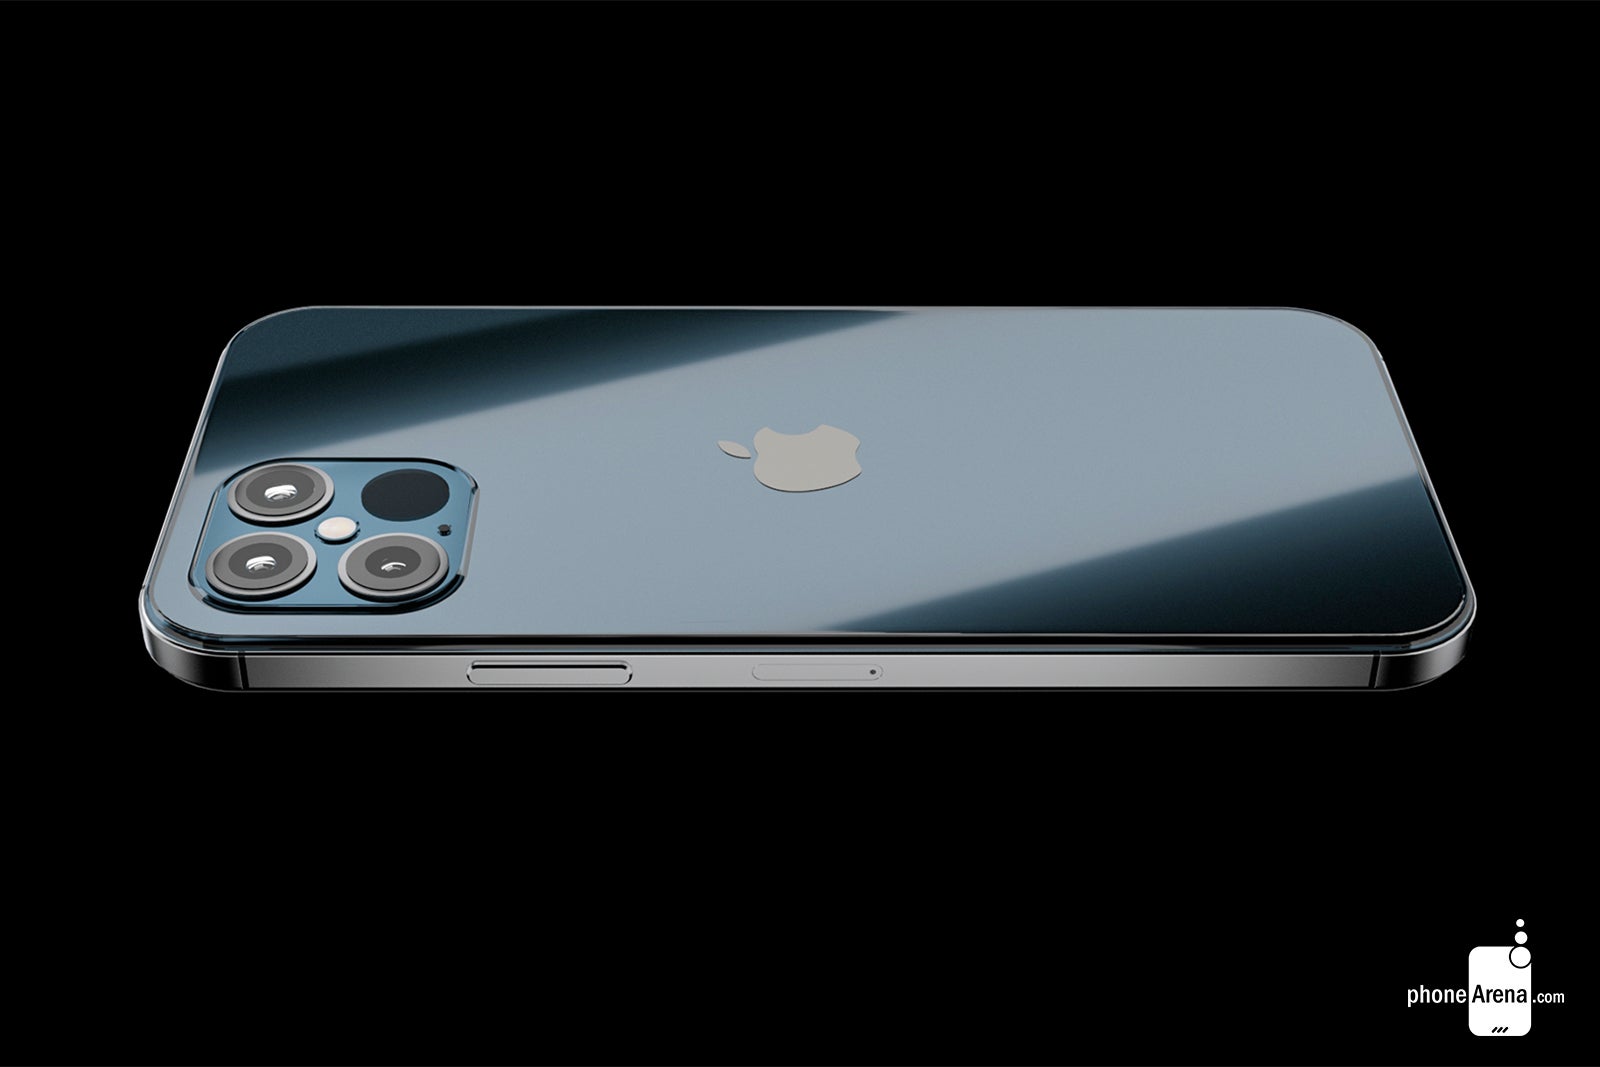 iPhone 12 Pro concept render - Apple might ship the iPhone 12 5G without earphones to boost AirPods sales